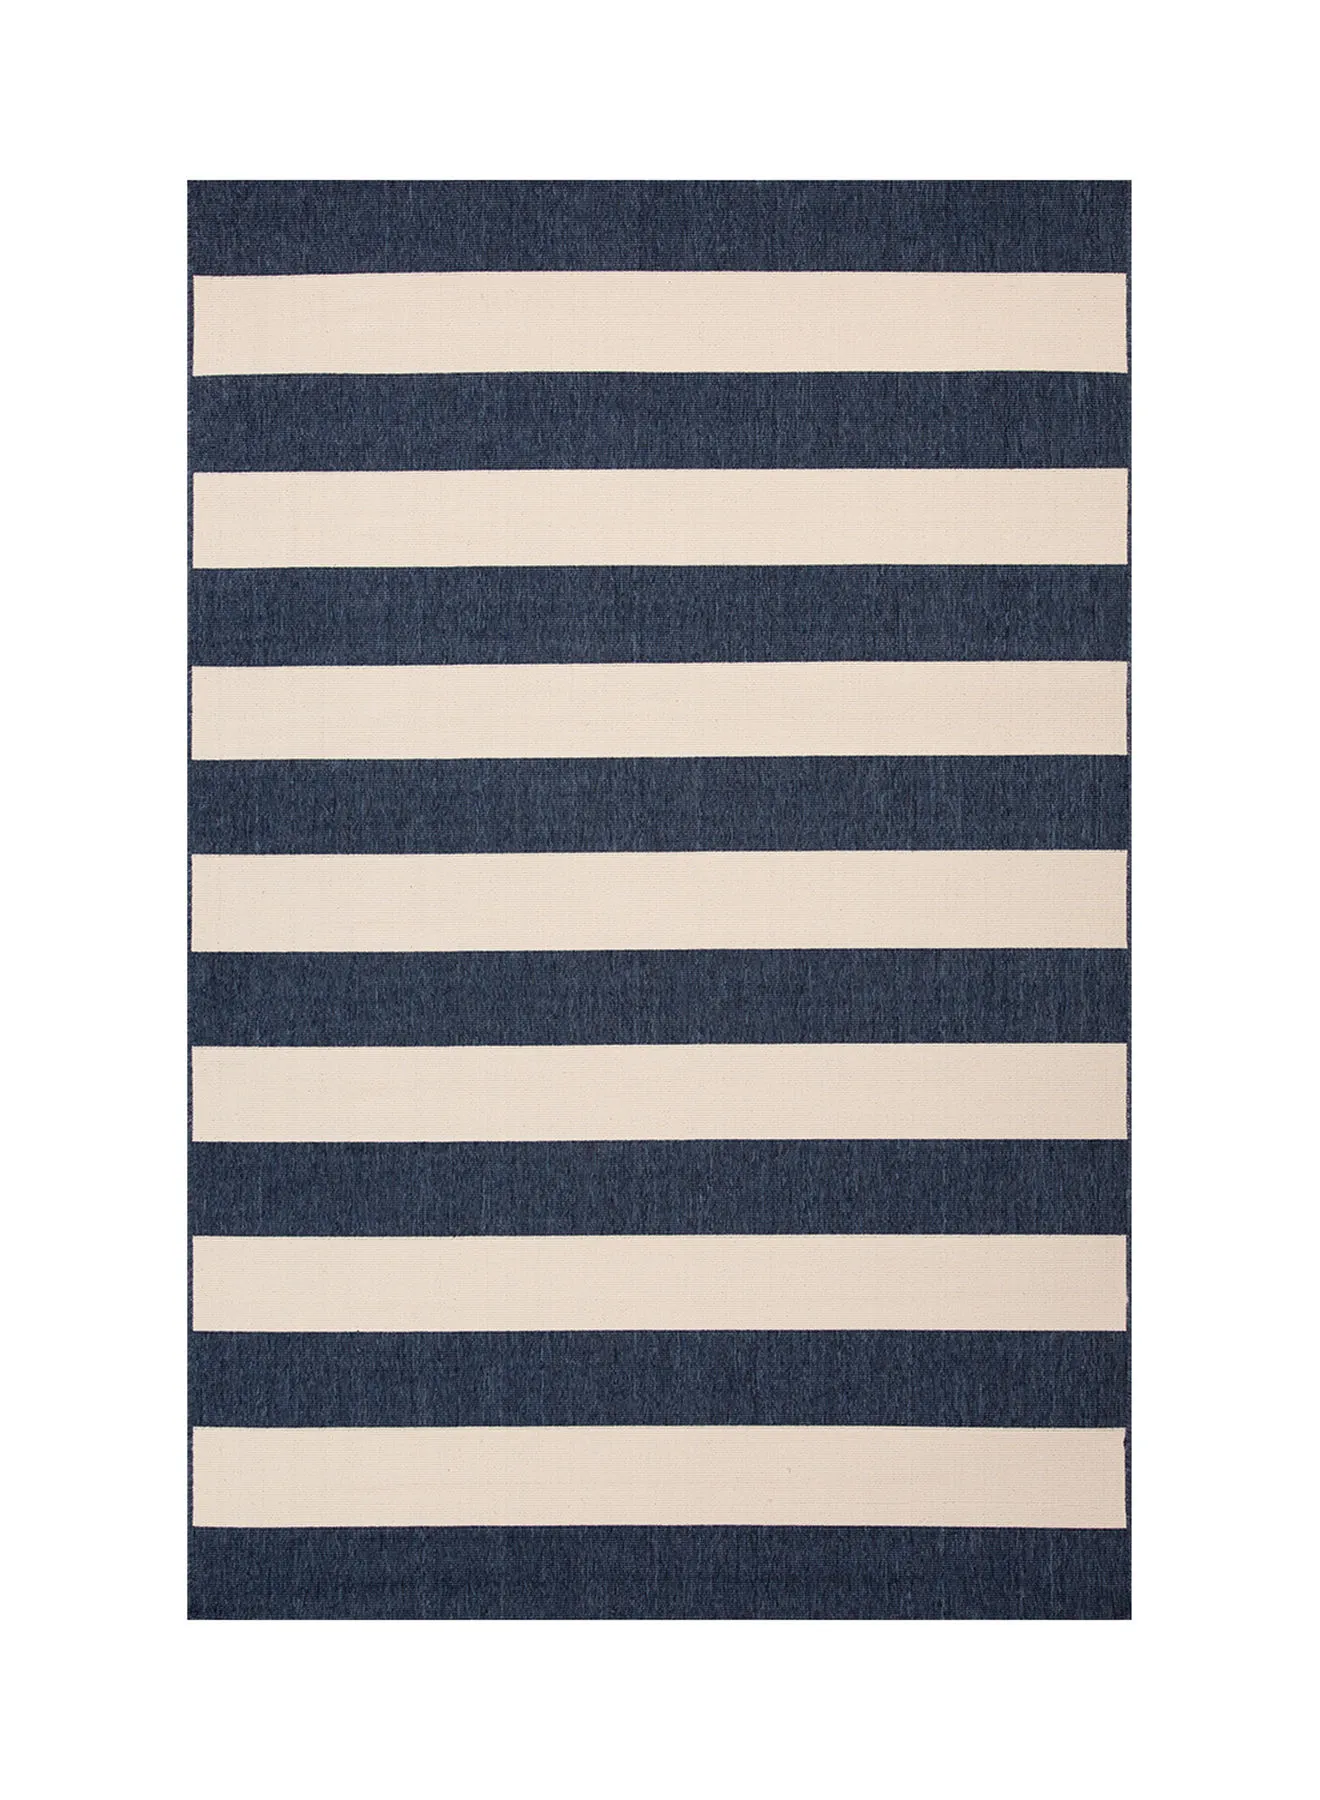 ebb & flow L. Tributary Outdoor Unique Luxury Quality Material Carpet For The Perfect Stylish Home 4465B Blue/White 280 x 380cm